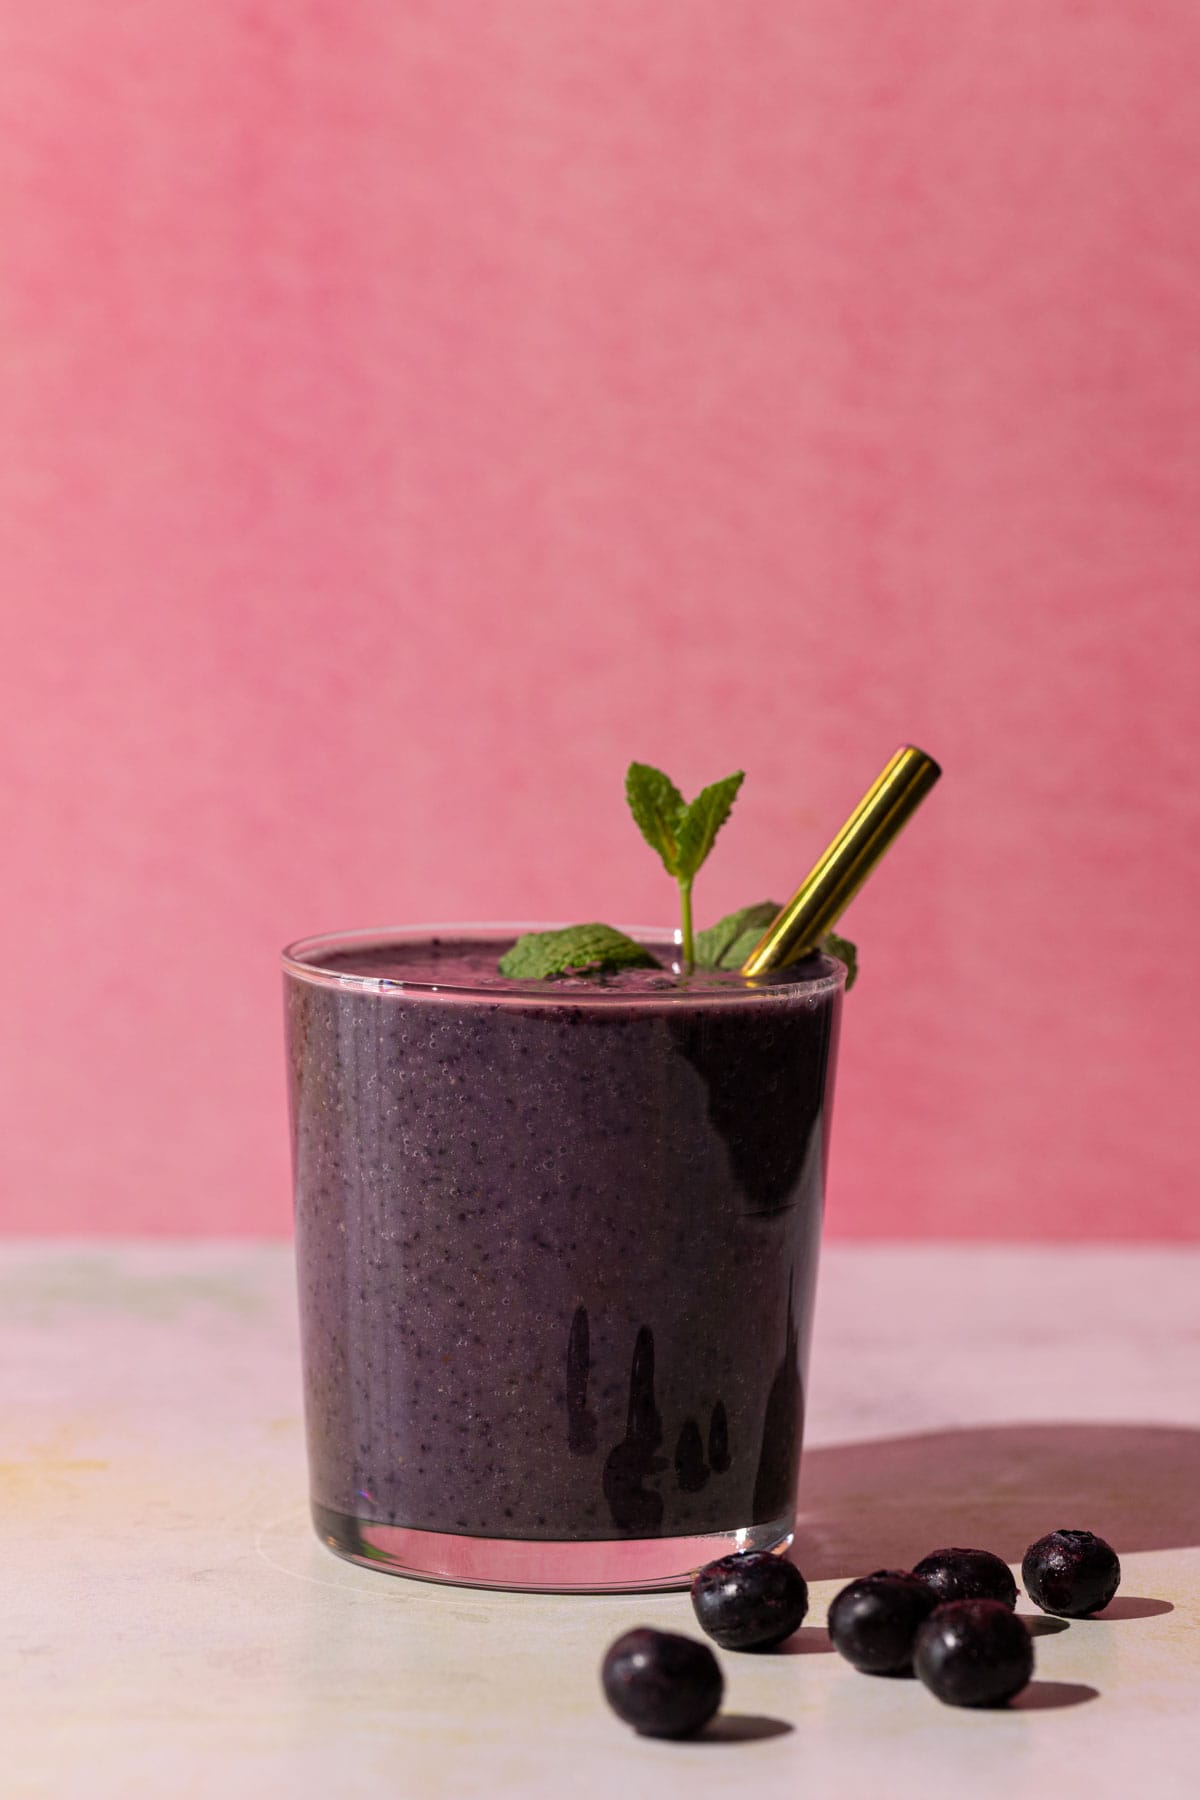 Blueberry Kale smoothie on a pink and white background with blueberries beside glass